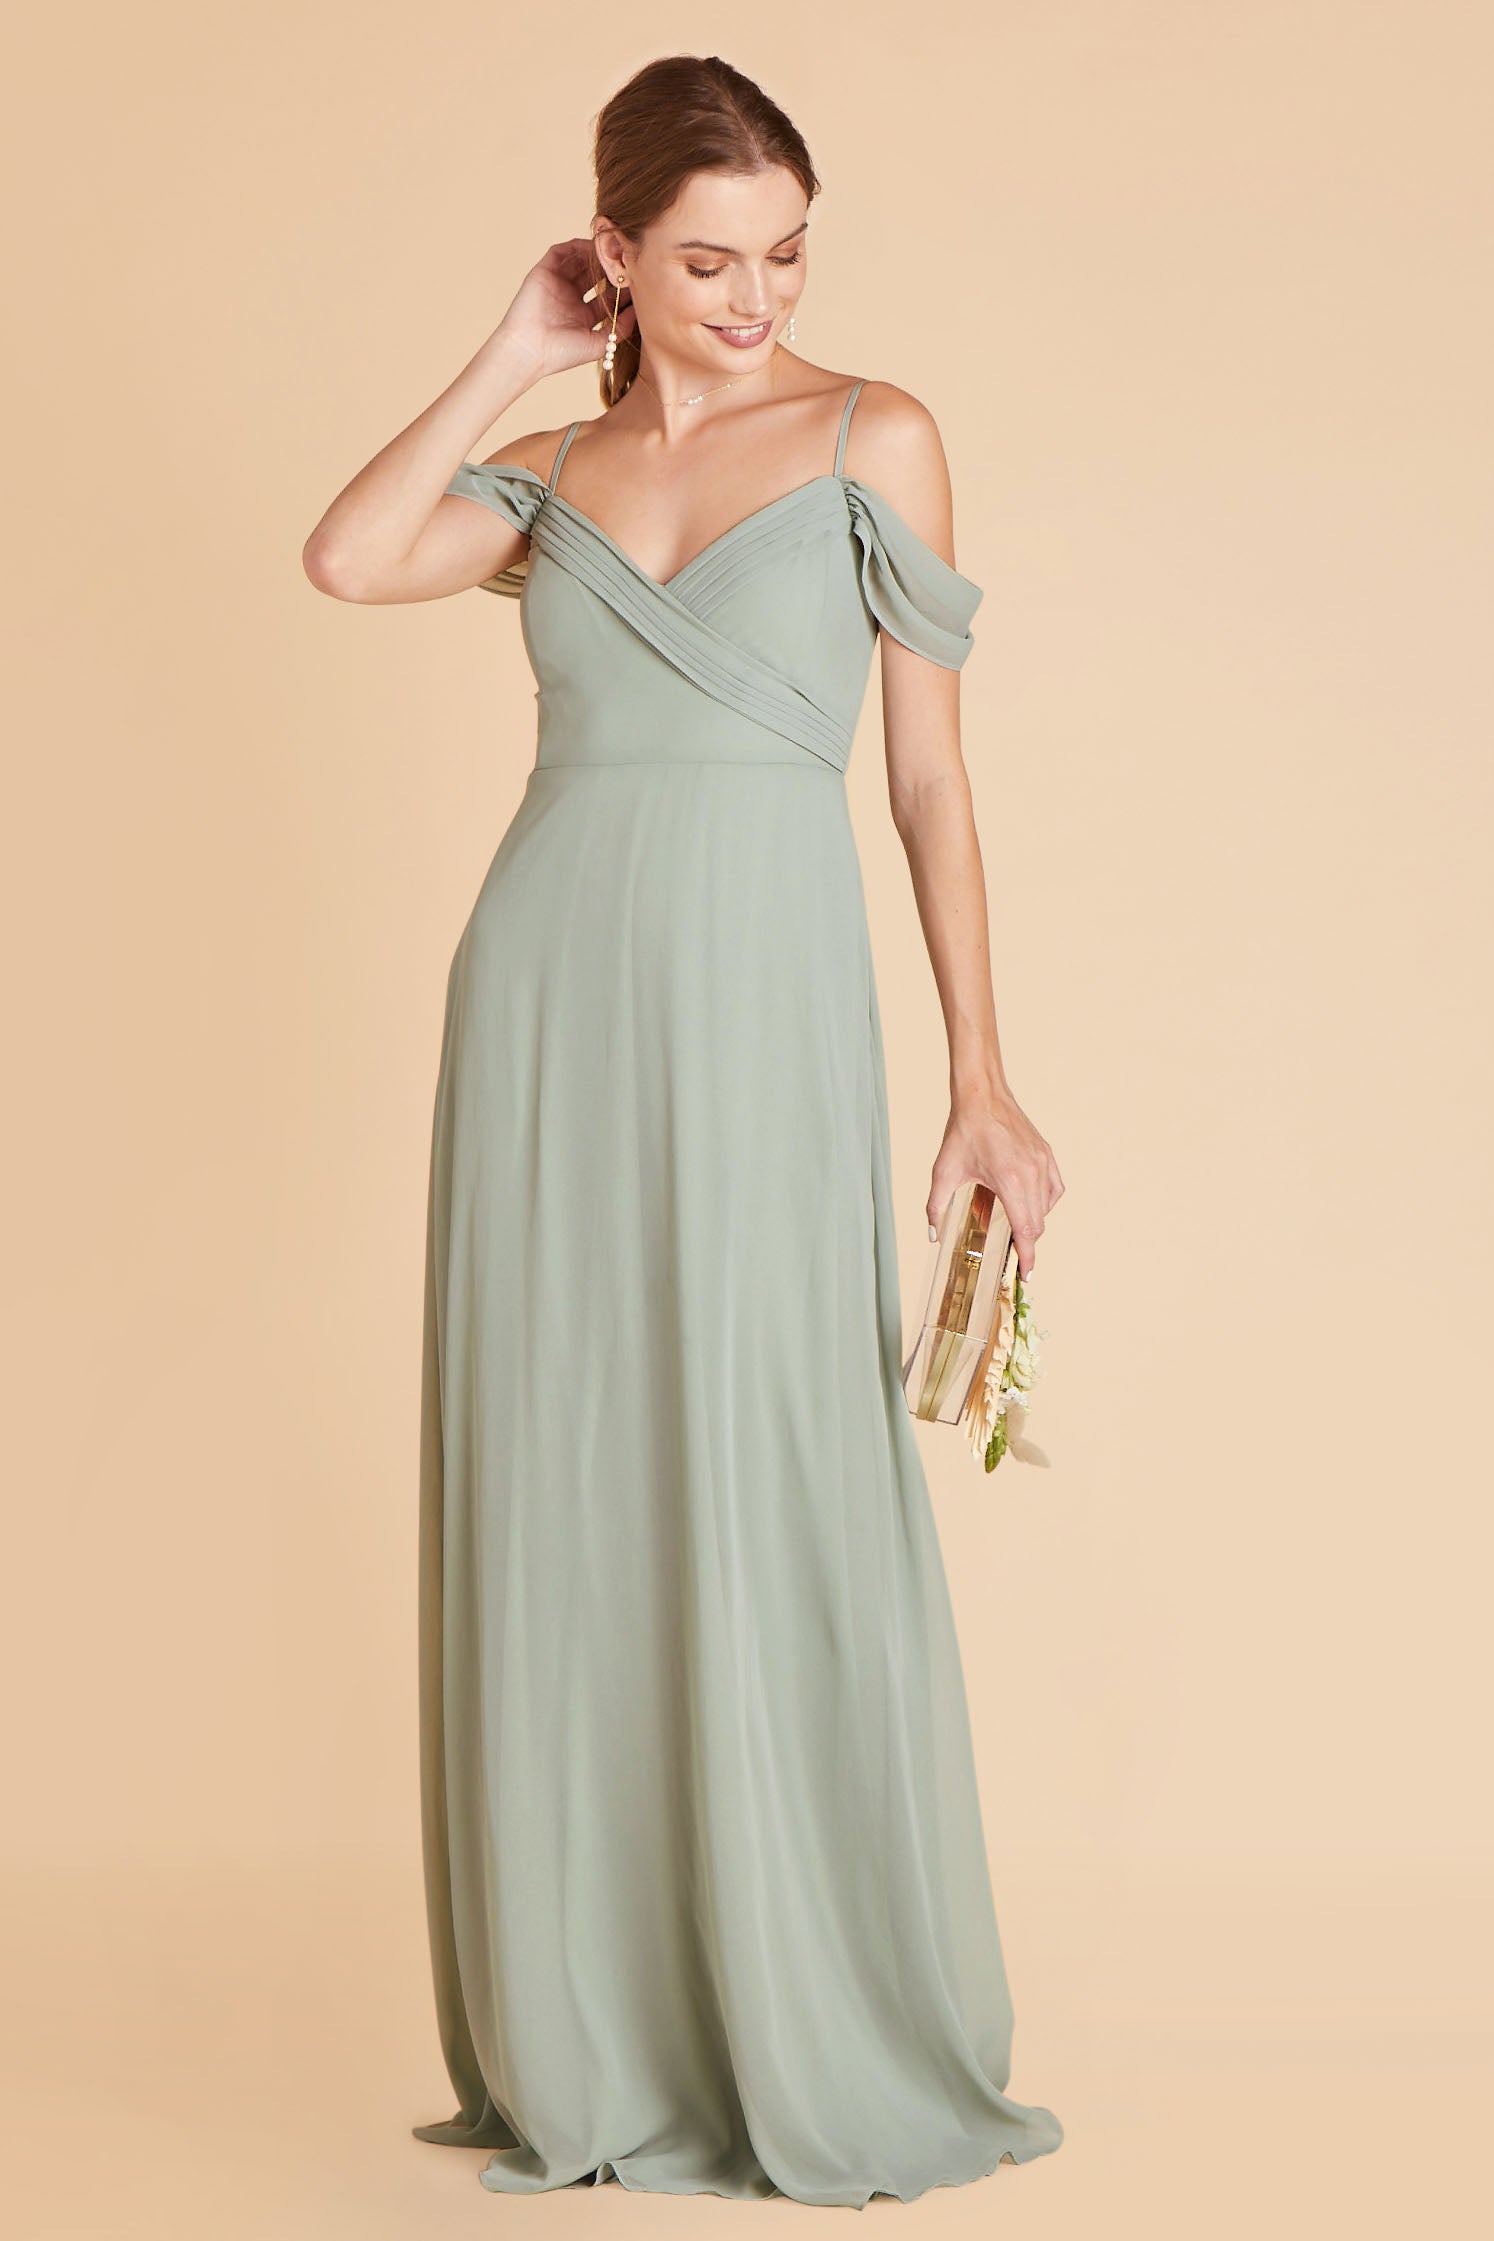 Spence convertible bridesmaid dress in sage green chiffon by Birdy Grey, front view